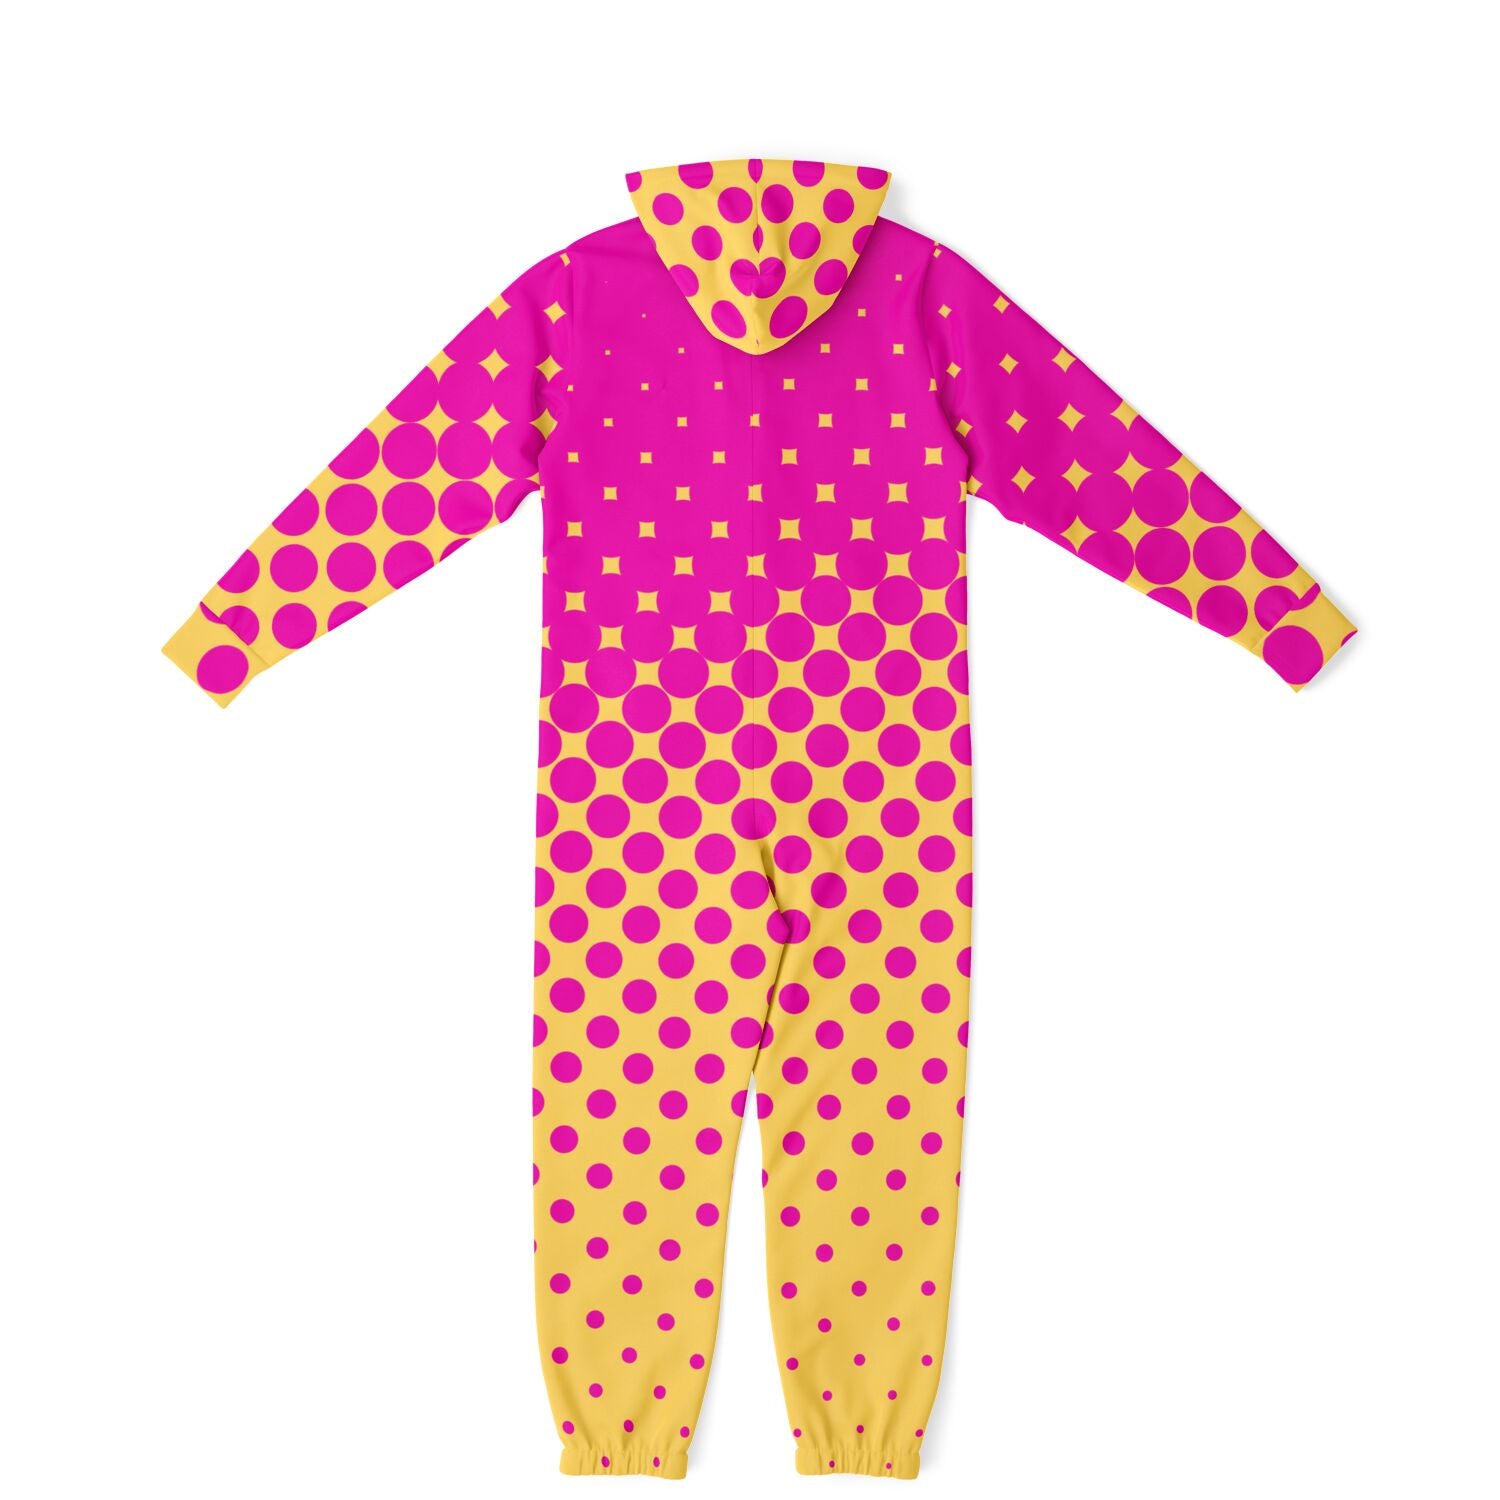 Rave Onesie for Men & Women | From Pink To Yellow